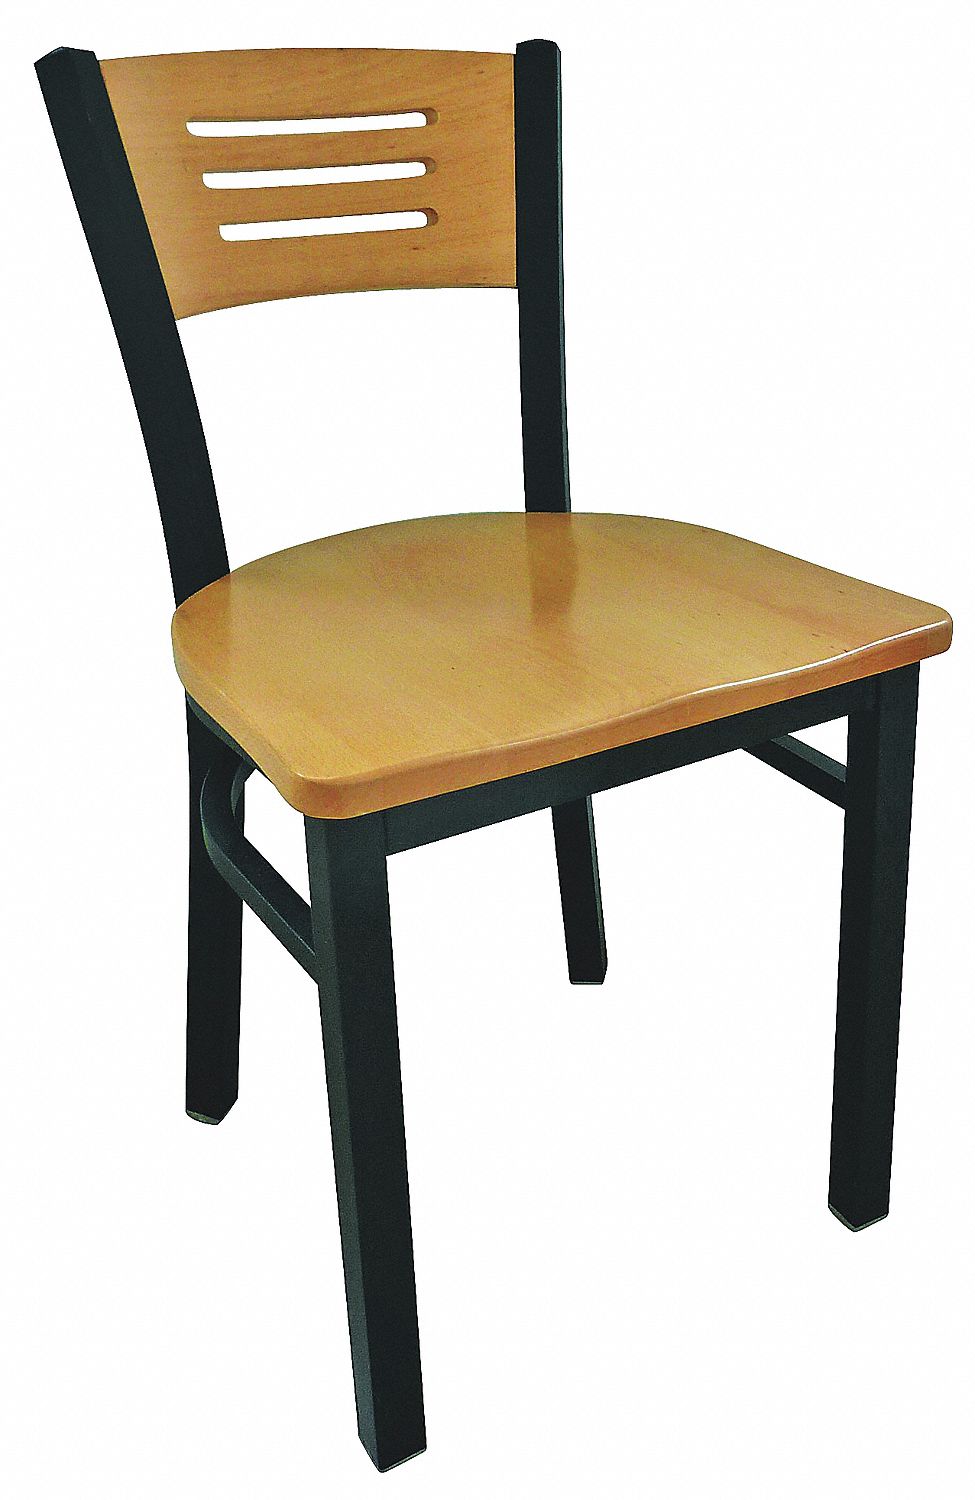 5VXZ3 - Cafe Chair 32-1/4 H 19-1/2 W Natural